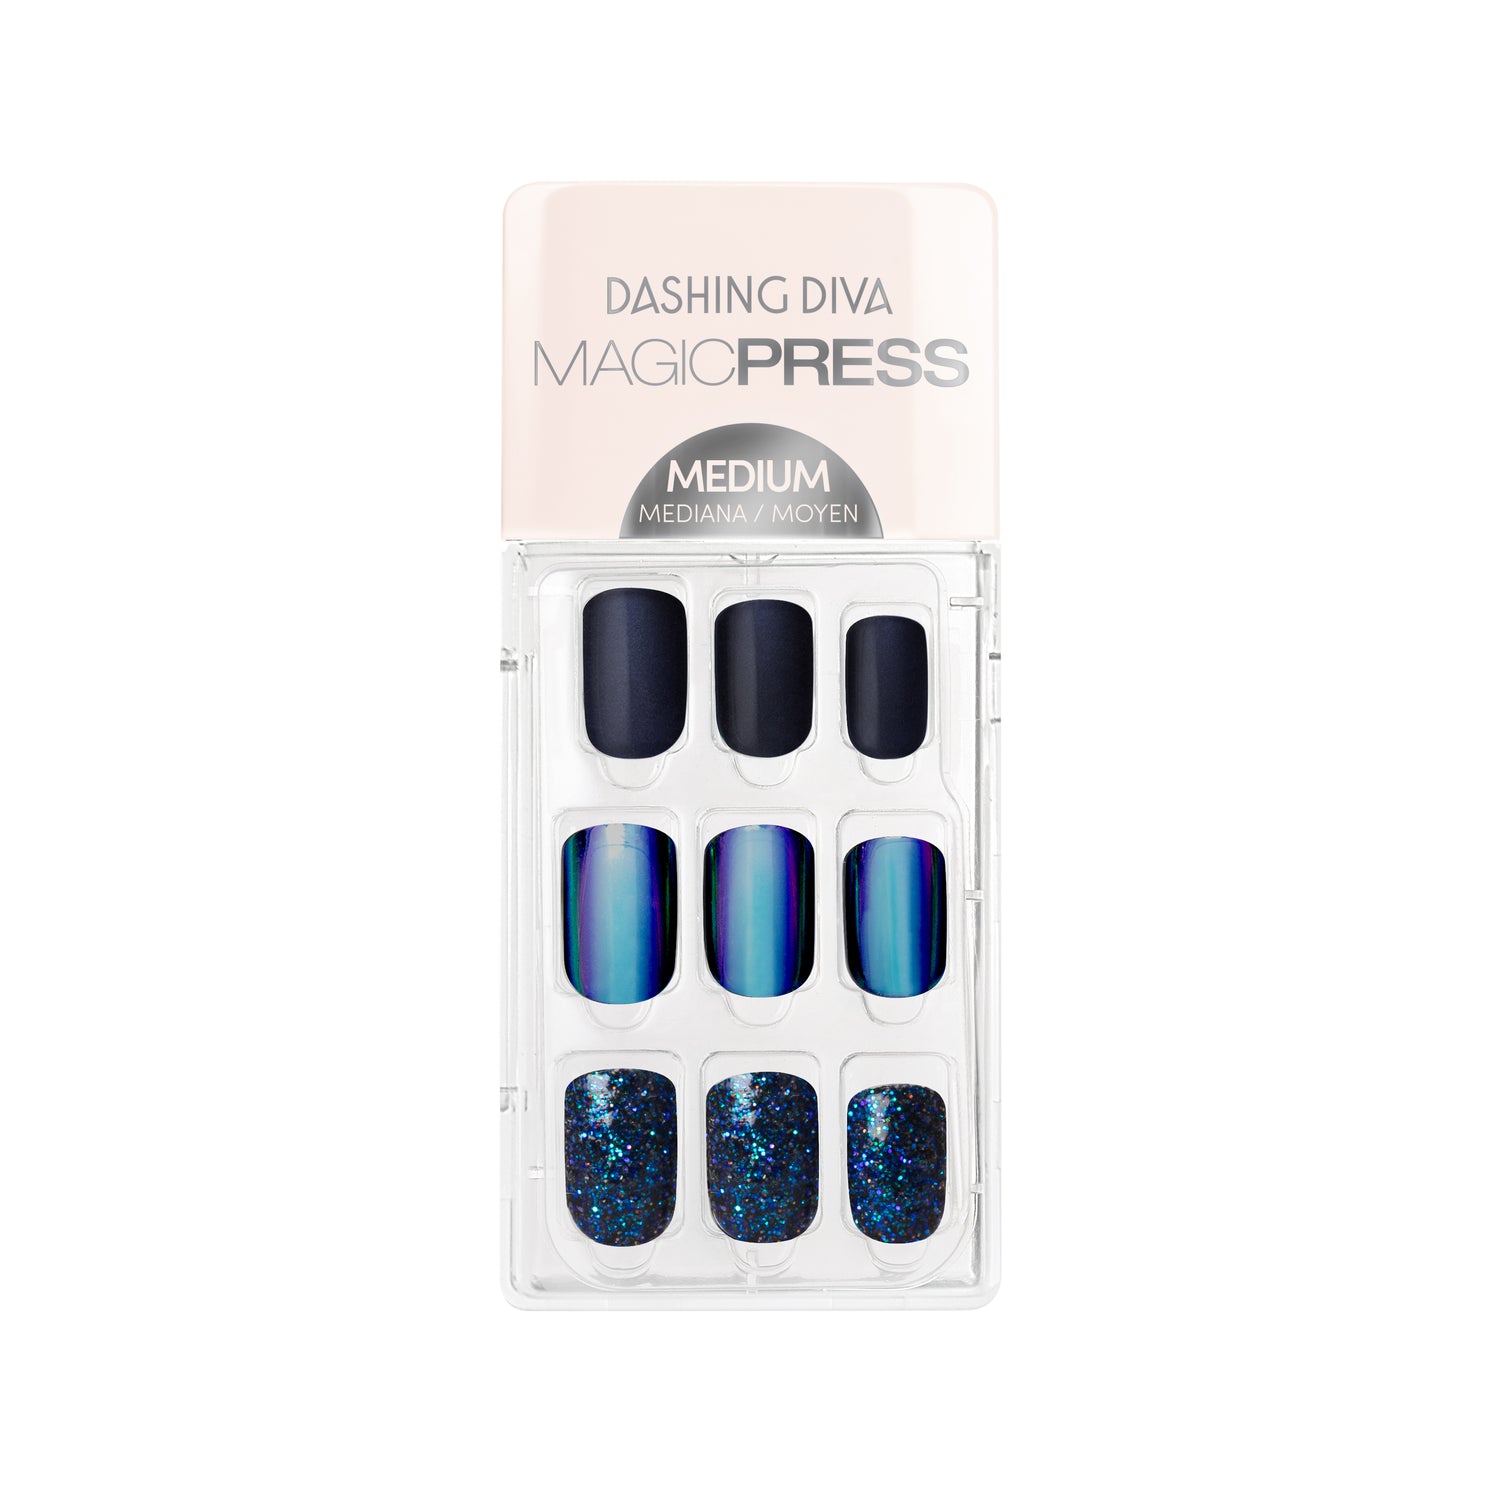 Dashing Diva MAGIC PRESS medium, square navy press on gel nails with holographic and glitter accents.